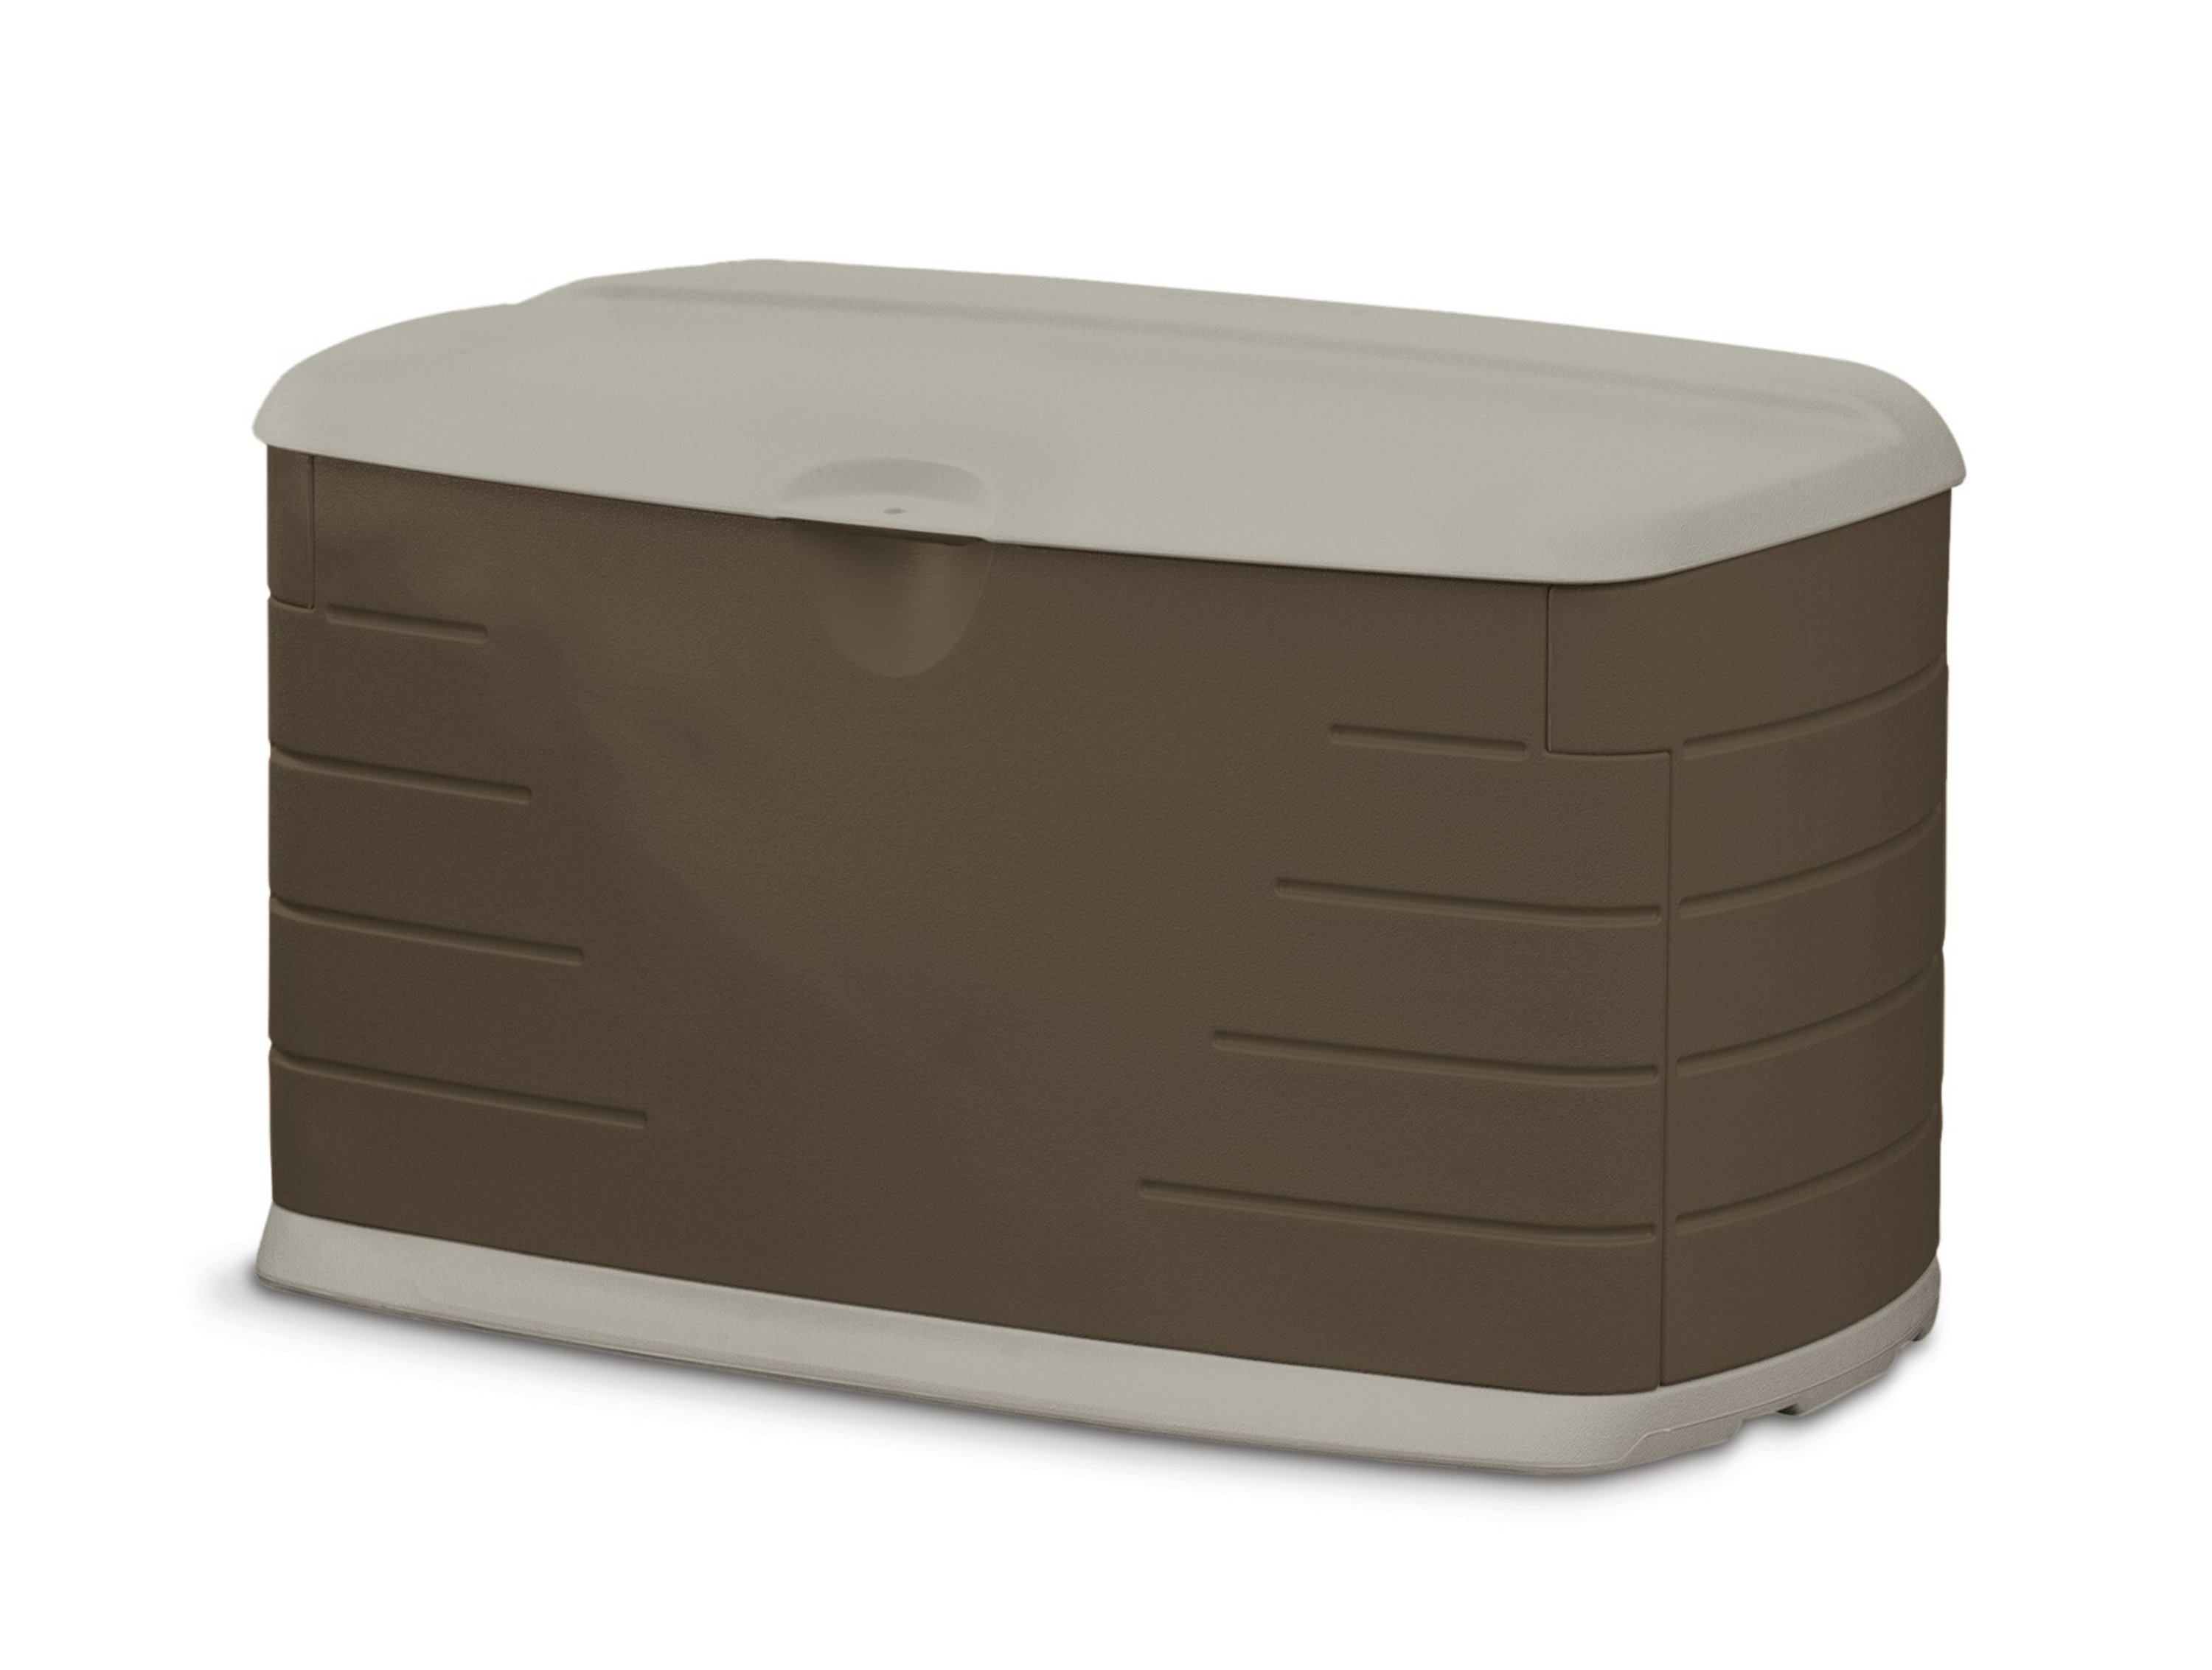 https://s7d9.scene7.com/is/image//NewellRubbermaid/2047053-outdoor-medium-deck-box-with-seat-putty-canteen-brown-3-1